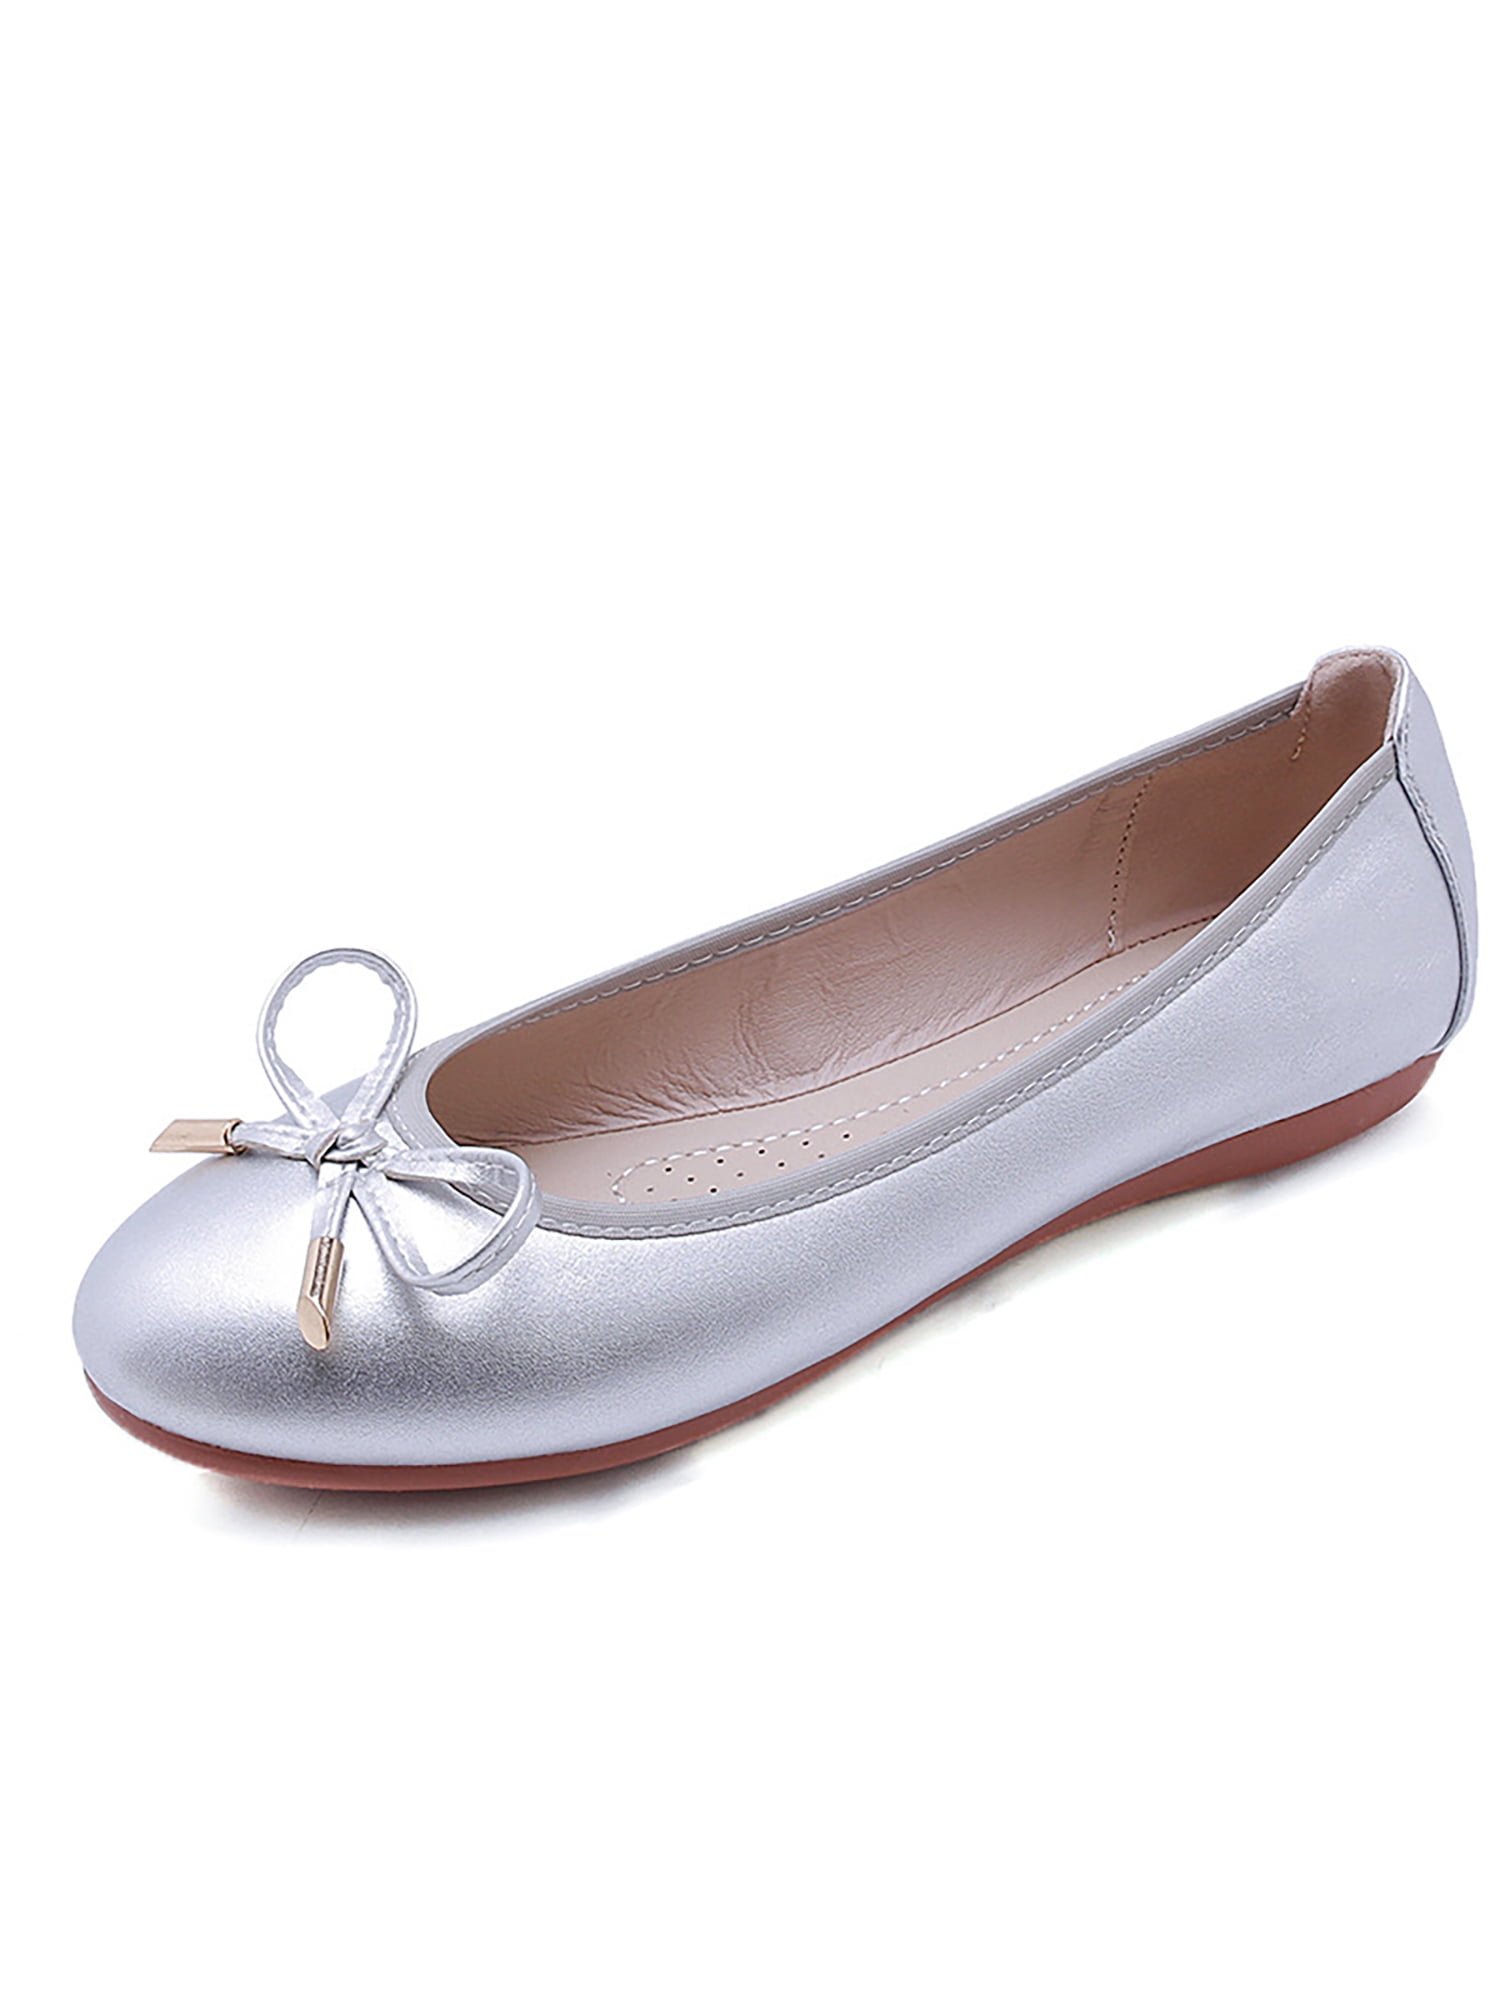 Ladies F10330 Silver Leather Casual Flats by Leather Collection retail £9.99 